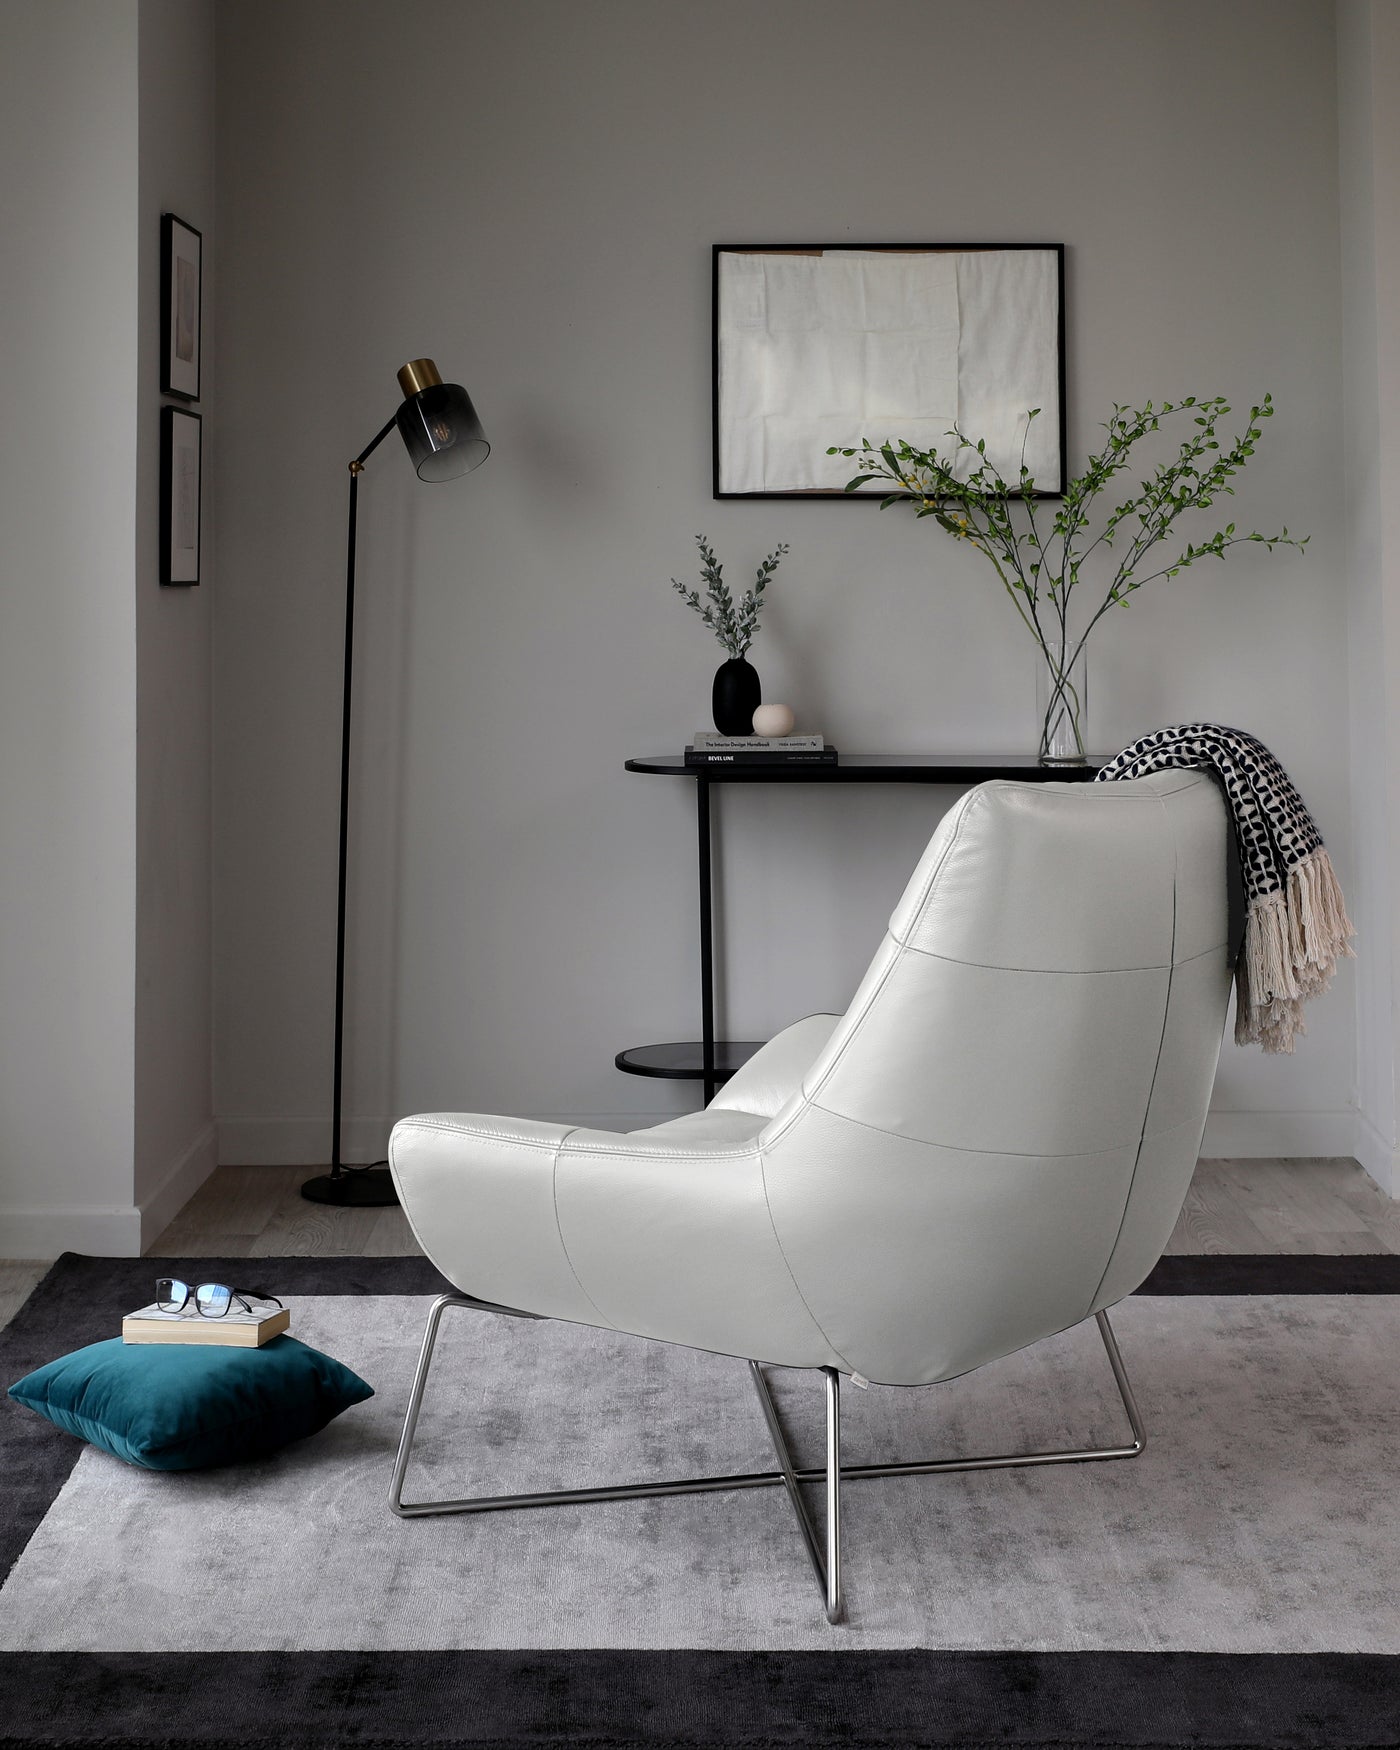 Modern light grey leather lounge chair with a high back and a chrome base, paired with a round black side table with two tiers, displaying decor and greenery. On the side, a tall black floor lamp with a minimalist design.